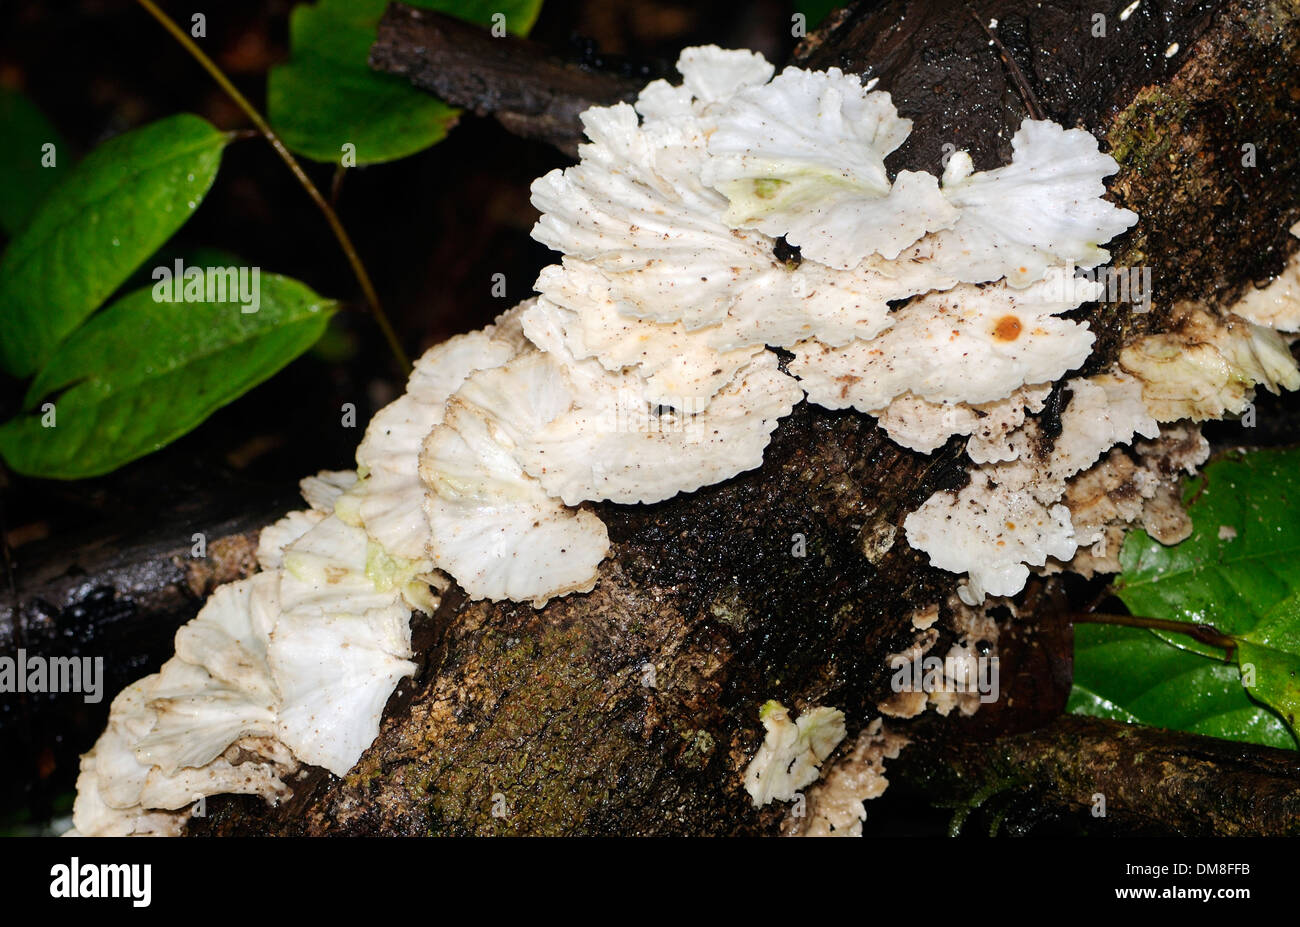 Fungi abound on the damp floor of the tropical rain forest. ro Peninsula. Drake Bay, Corcovado National Park, Costa Rica Stock Photo